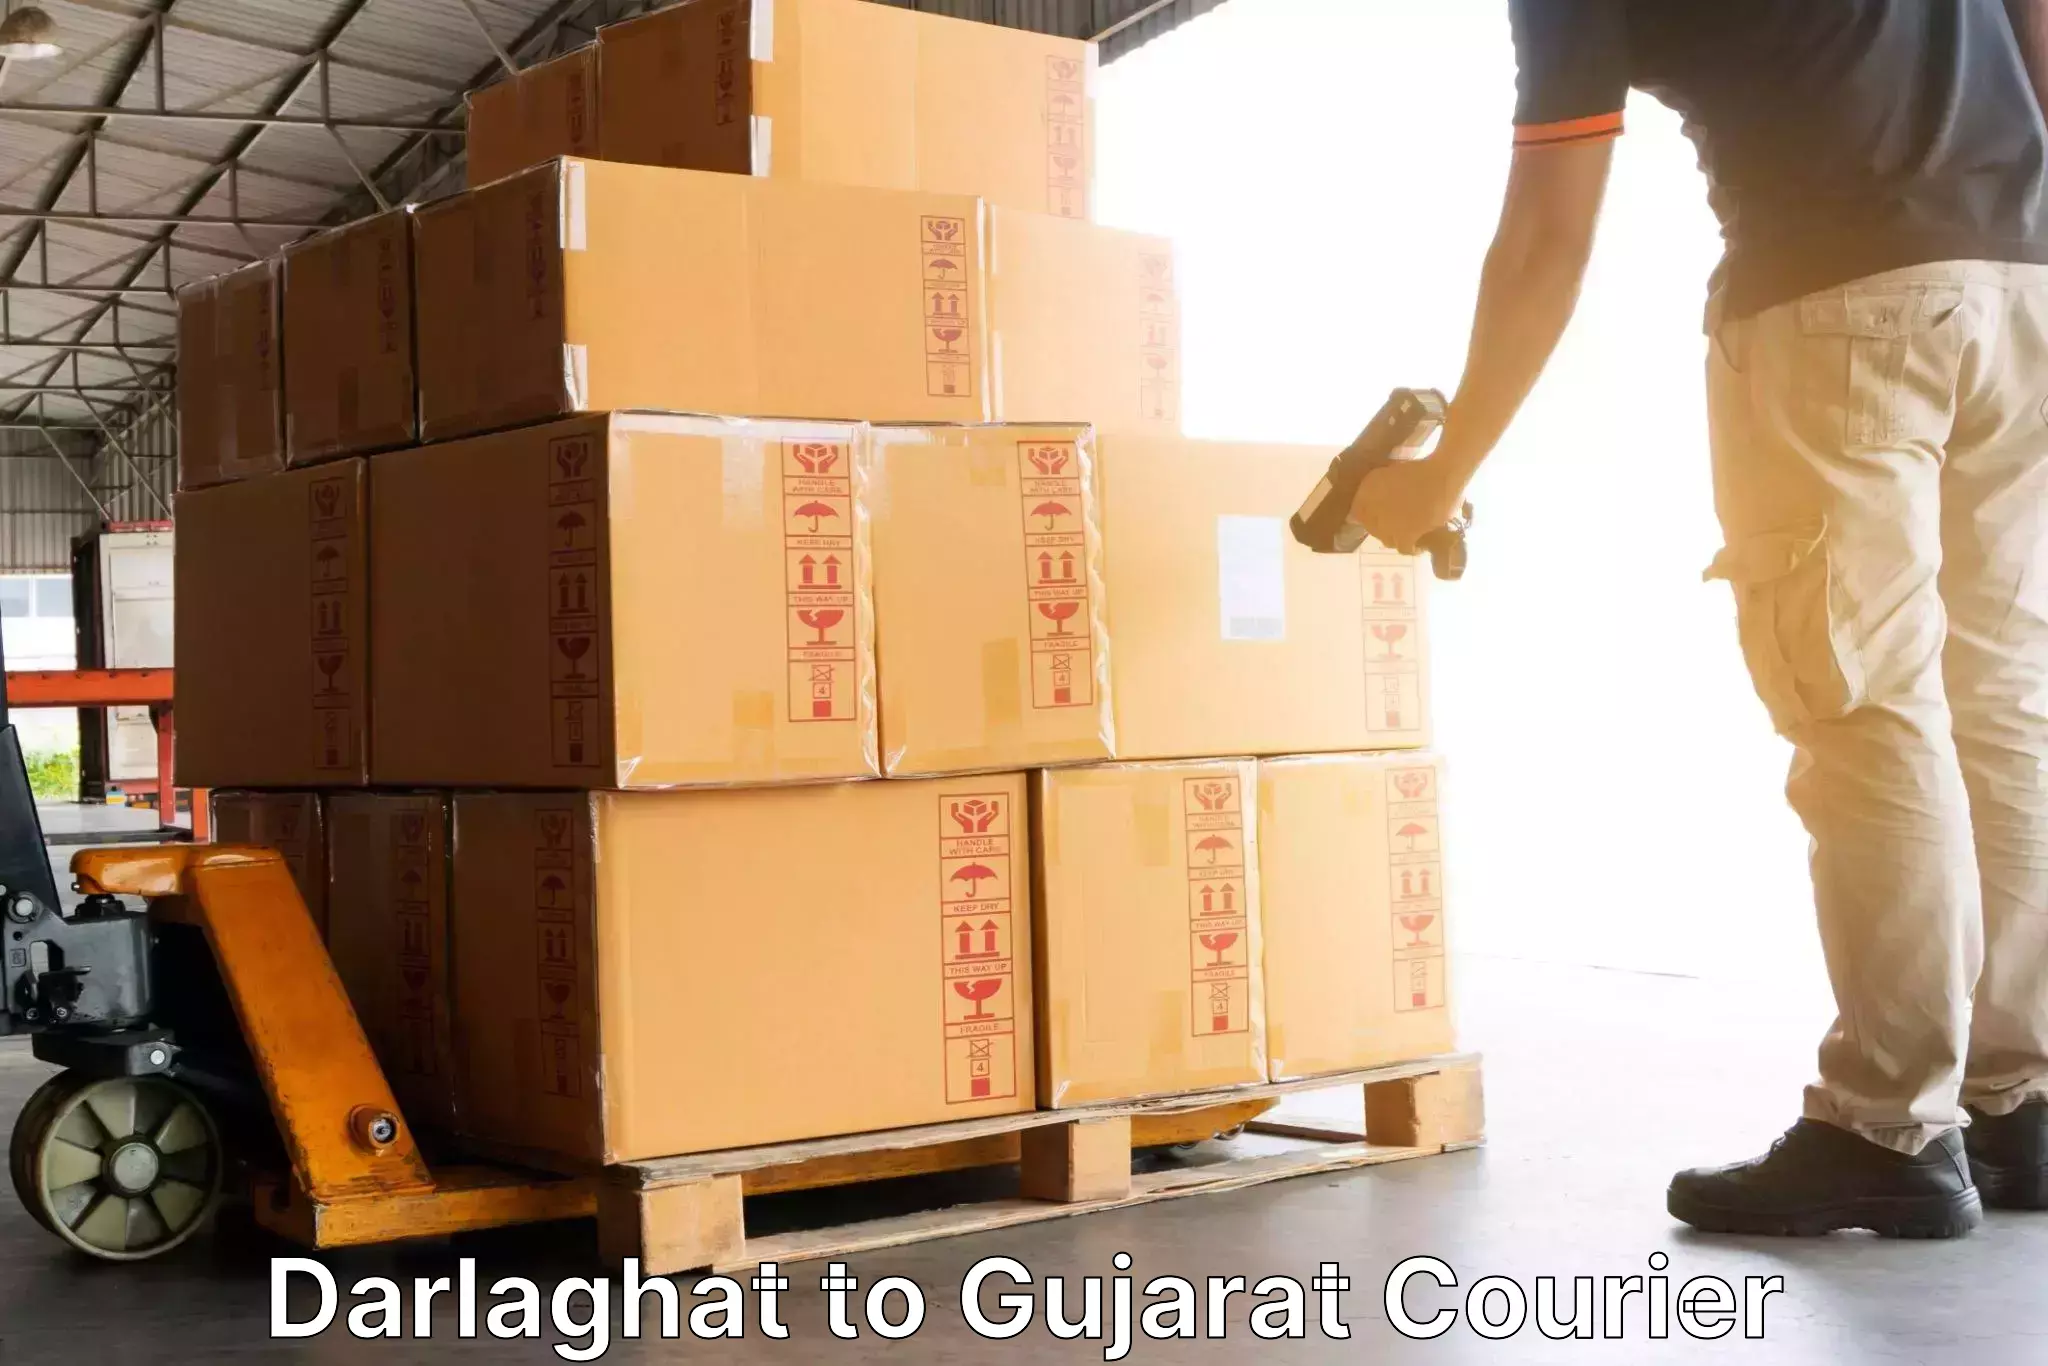 Courier service booking Darlaghat to Gujarat